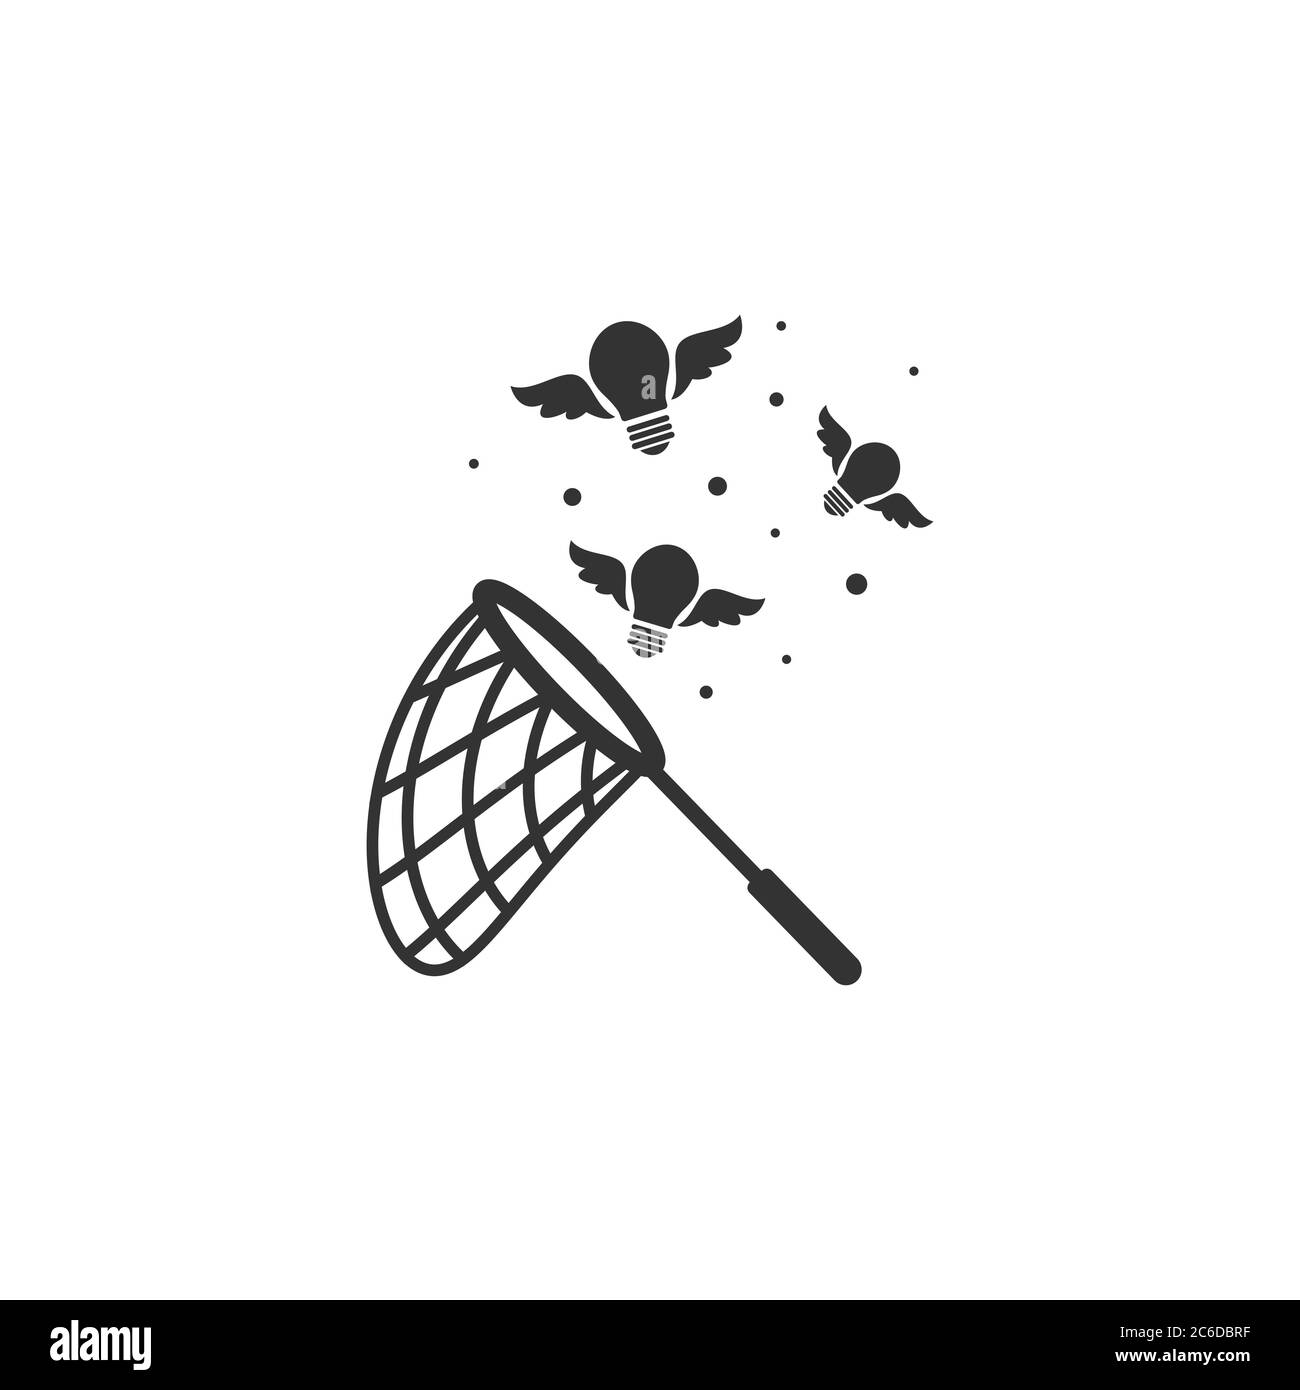 Butterfly net with flying bulbs. Catch, hunt, chase ideas and solutions symbol. Inspiration search concept. creative, innovation, training. Vector ill Stock Vector